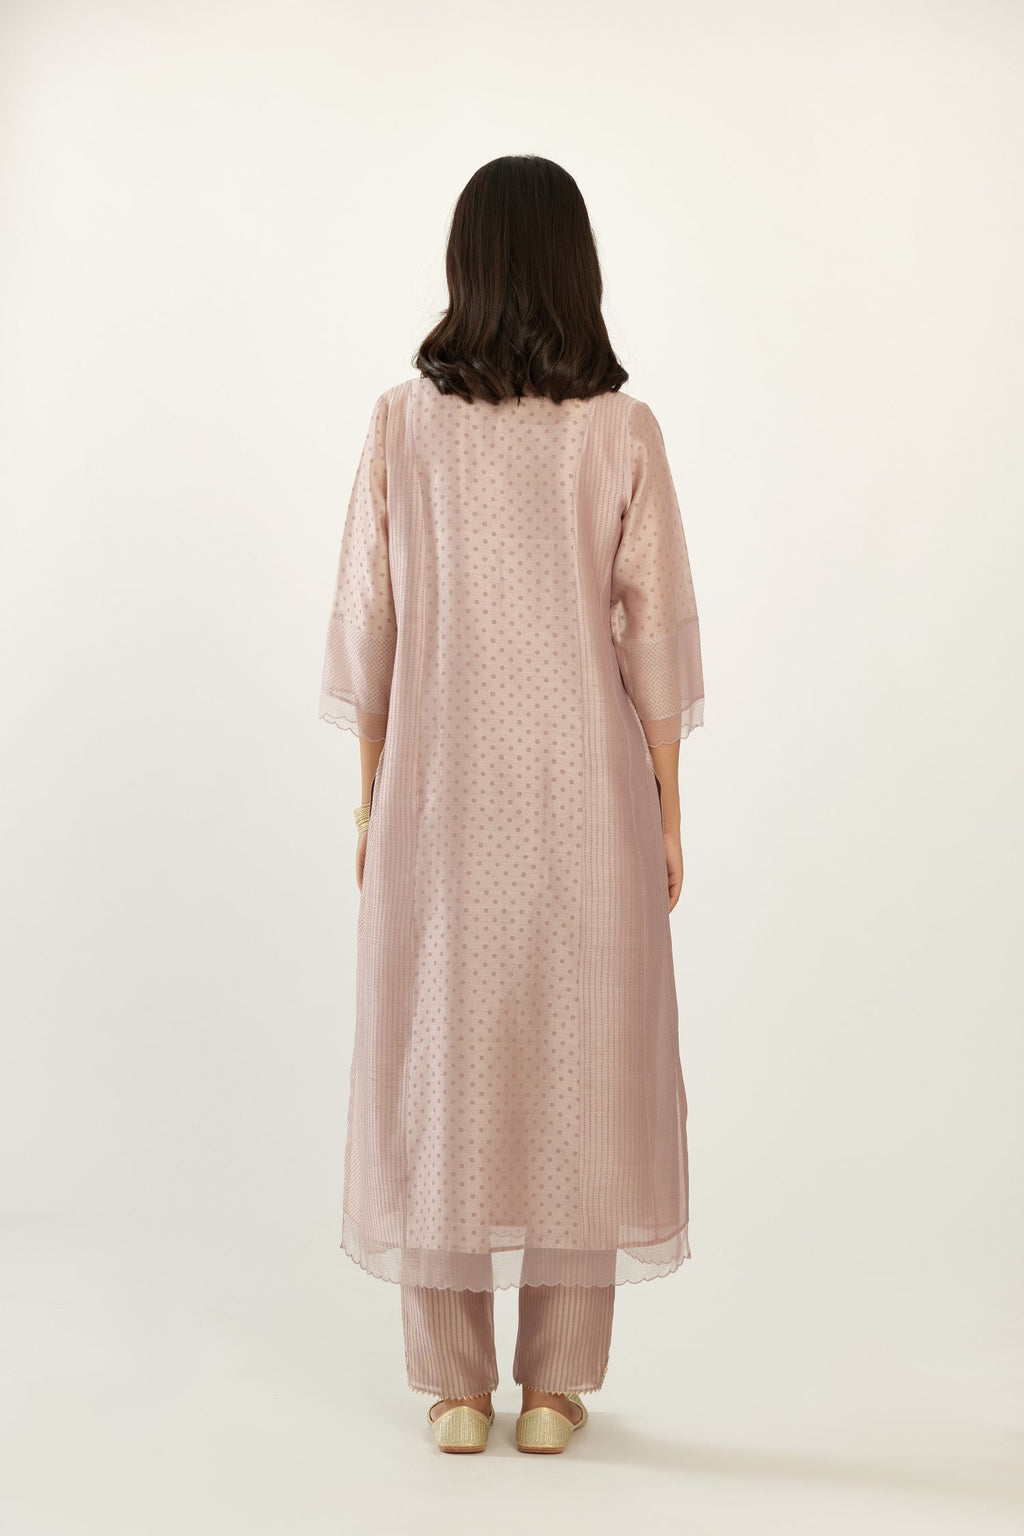 Lilac silk chanderi hand block printed straight kurta set with concealed button placket neckline, highlighted with scalloped organza at edges.